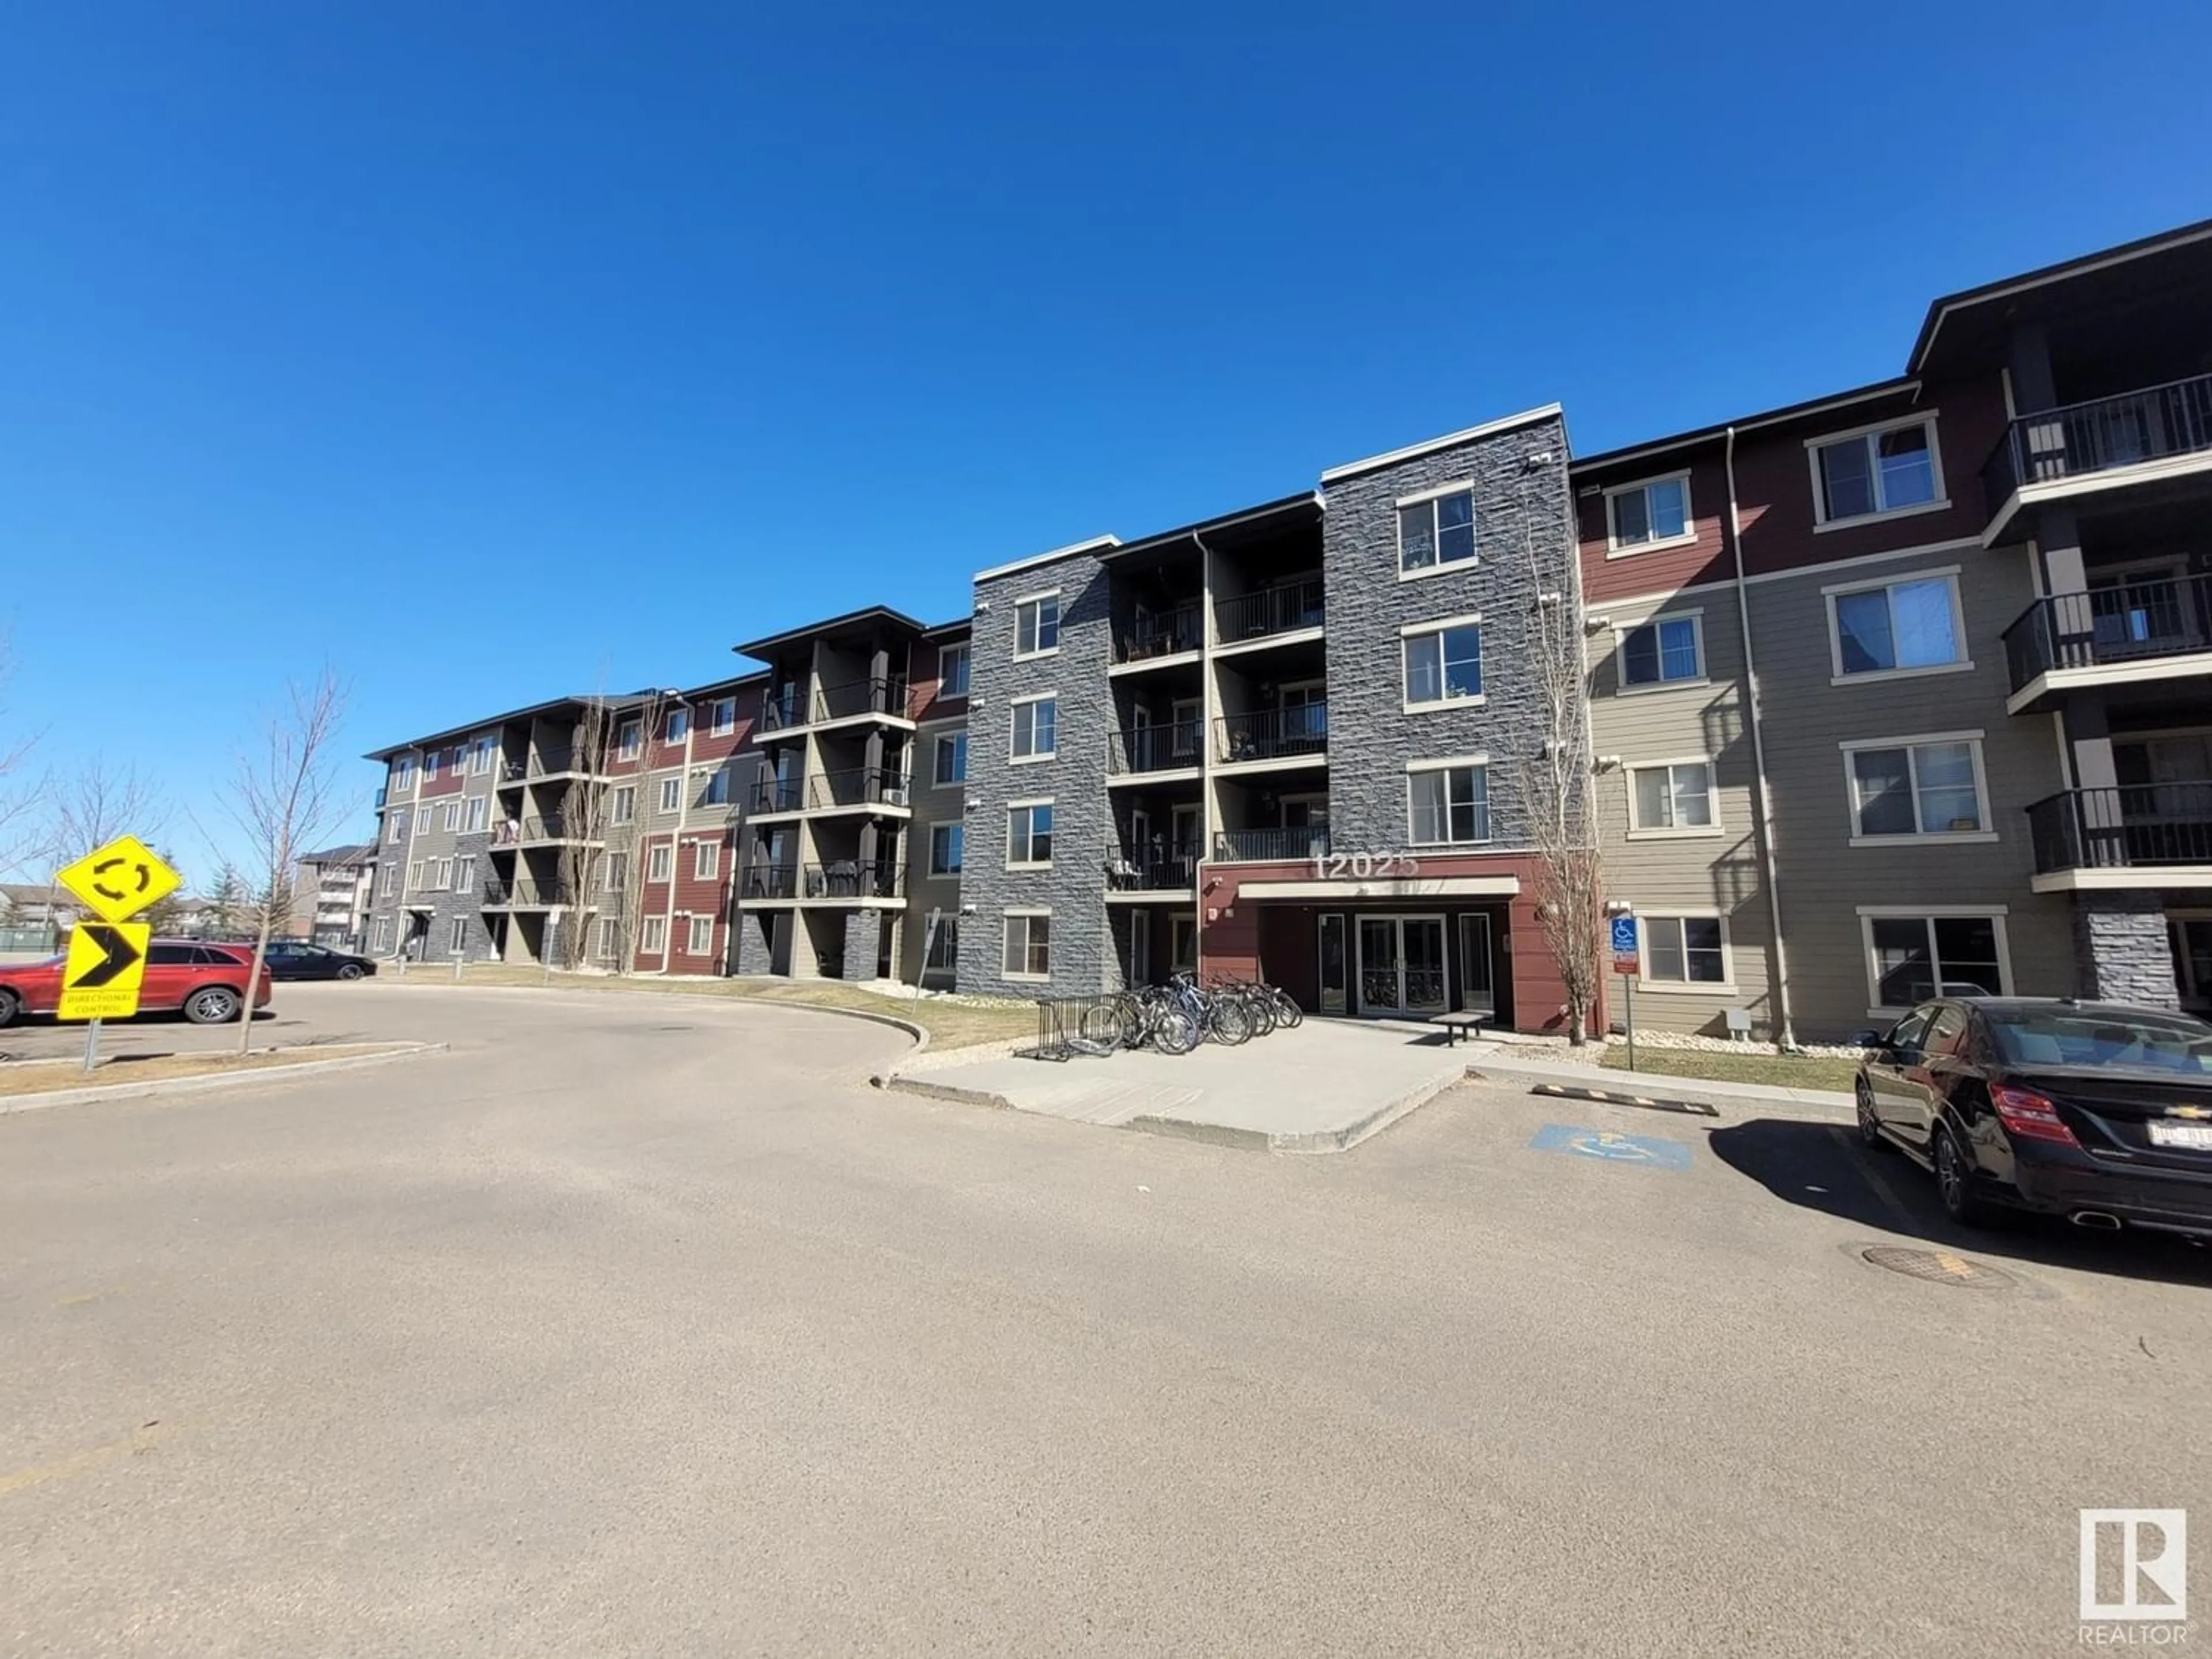 A pic from exterior of the house or condo for #407 12025 22 AV SW, Edmonton Alberta T6W2Y1